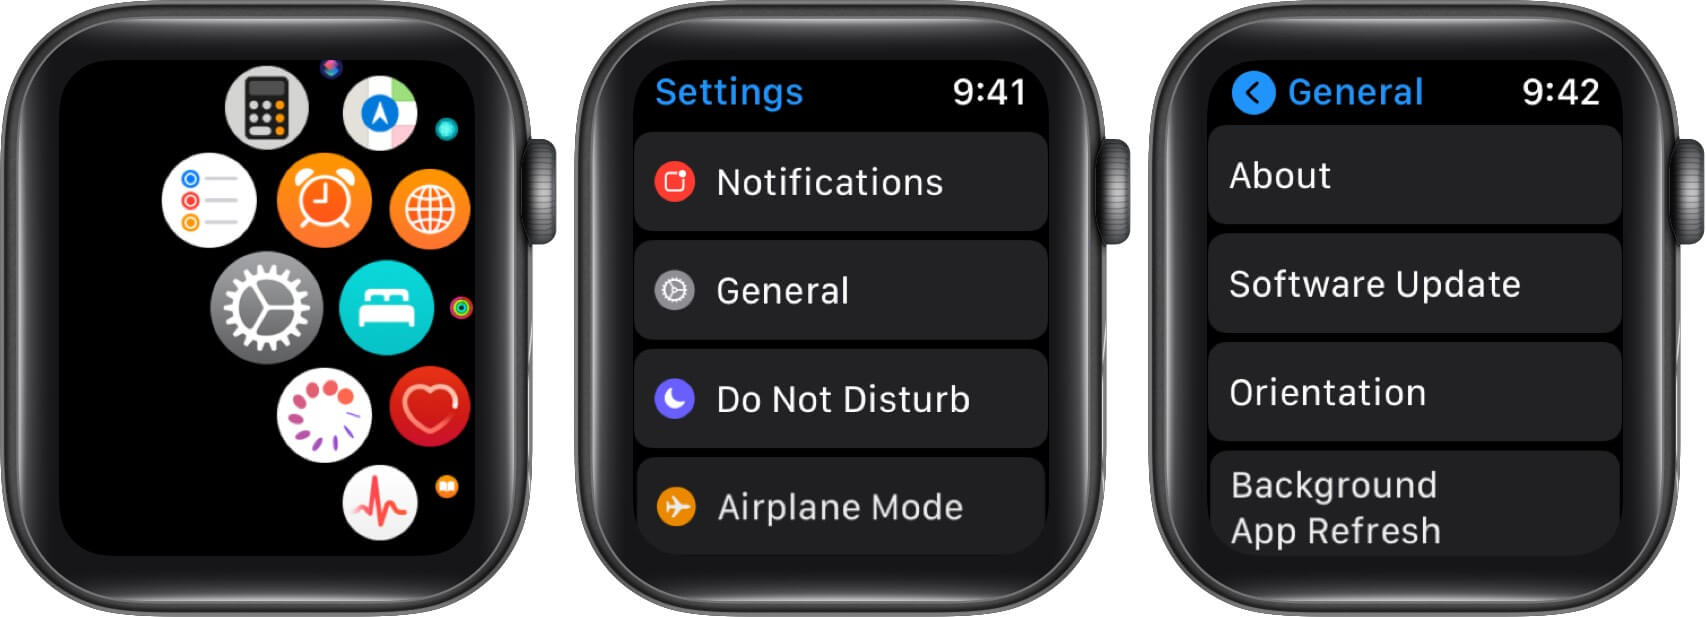 Open Settings Tap on General and Then Tap on Update on Apple Watch